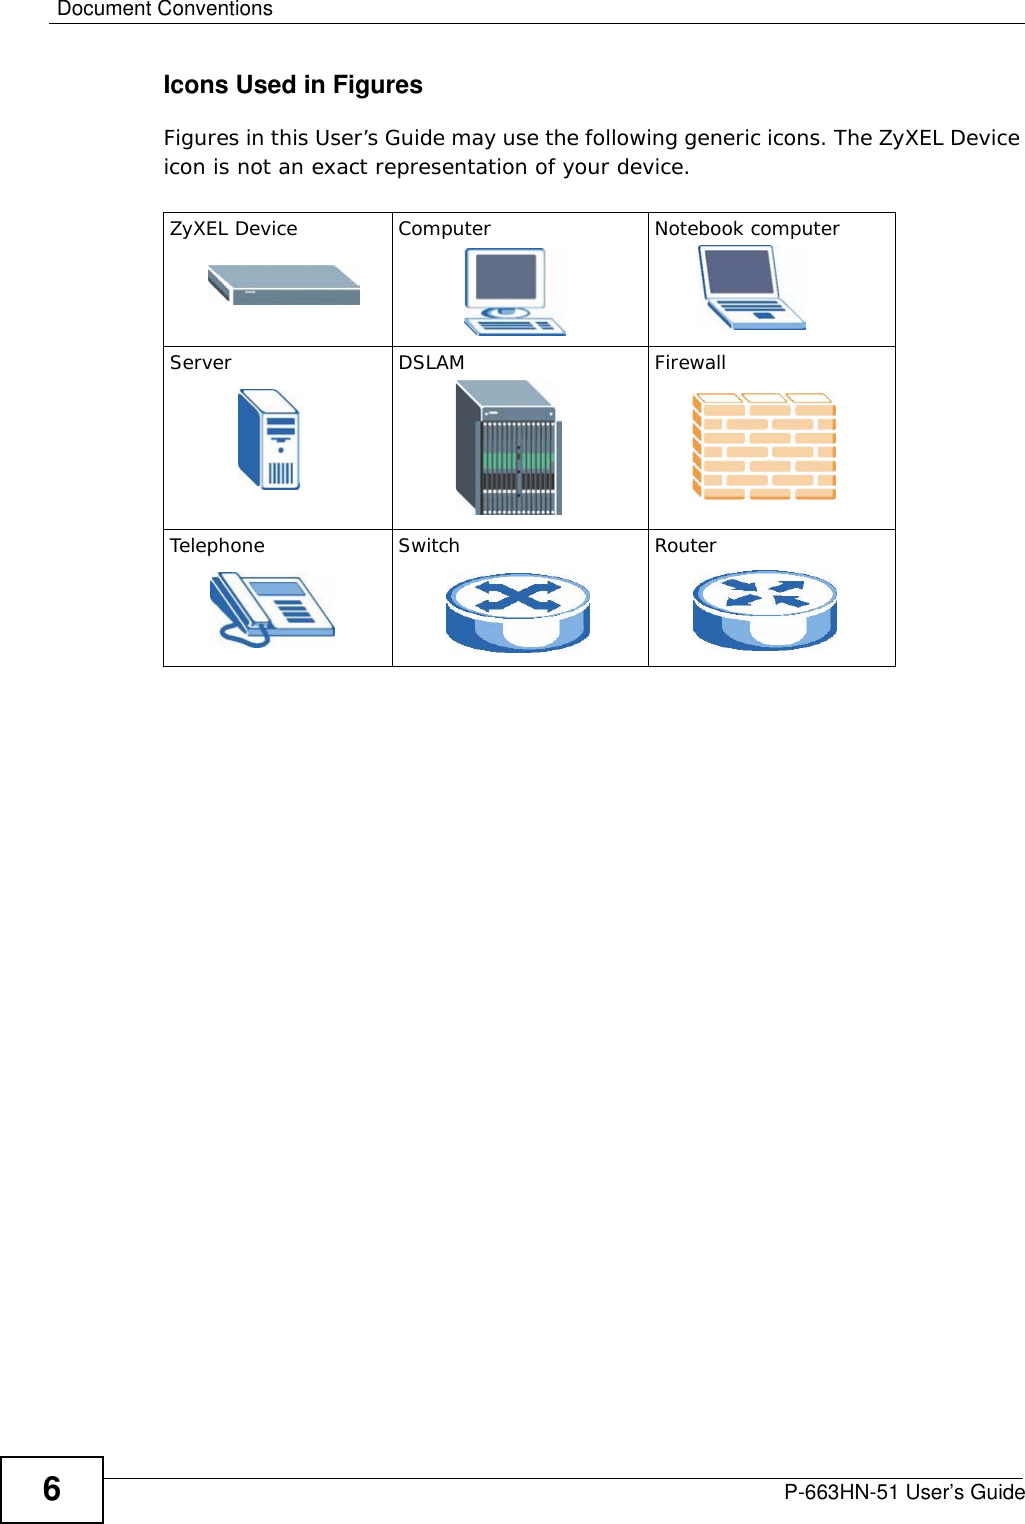 Document ConventionsP-663HN-51 User’s Guide6Icons Used in FiguresFigures in this User’s Guide may use the following generic icons. The ZyXEL Device icon is not an exact representation of your device.ZyXEL Device Computer Notebook computerServer DSLAM FirewallTelephone Switch Router